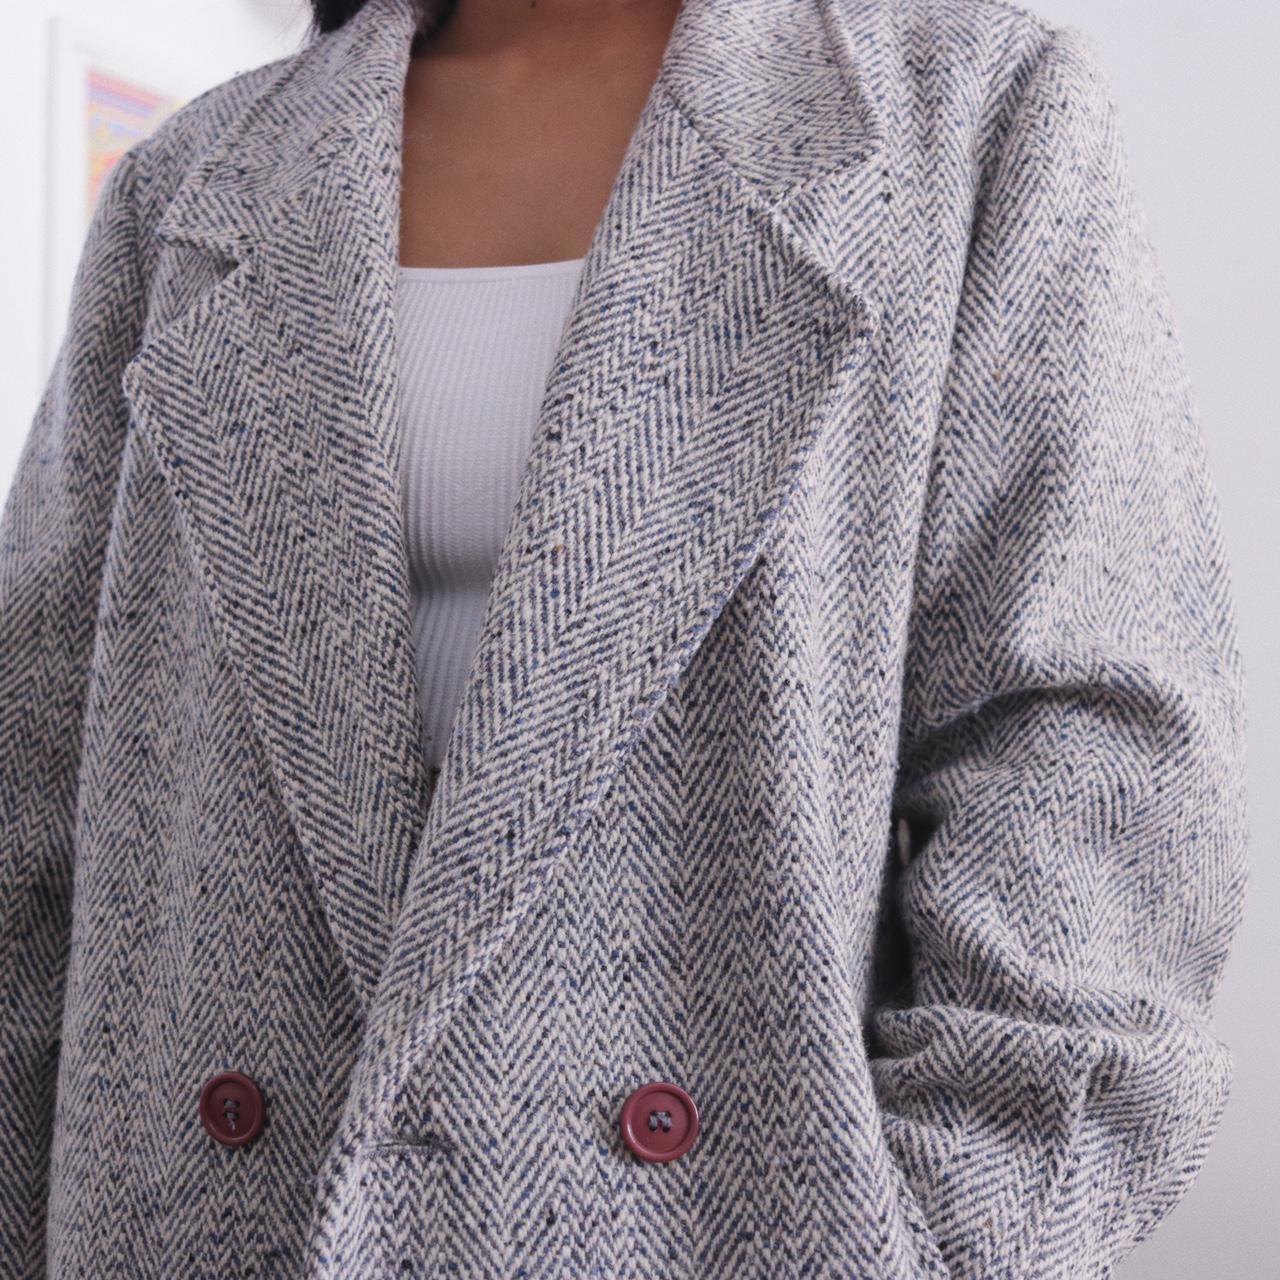 Product Image 3 - vintage 60s tweed peacoat

DESCRIPTION
the perfect